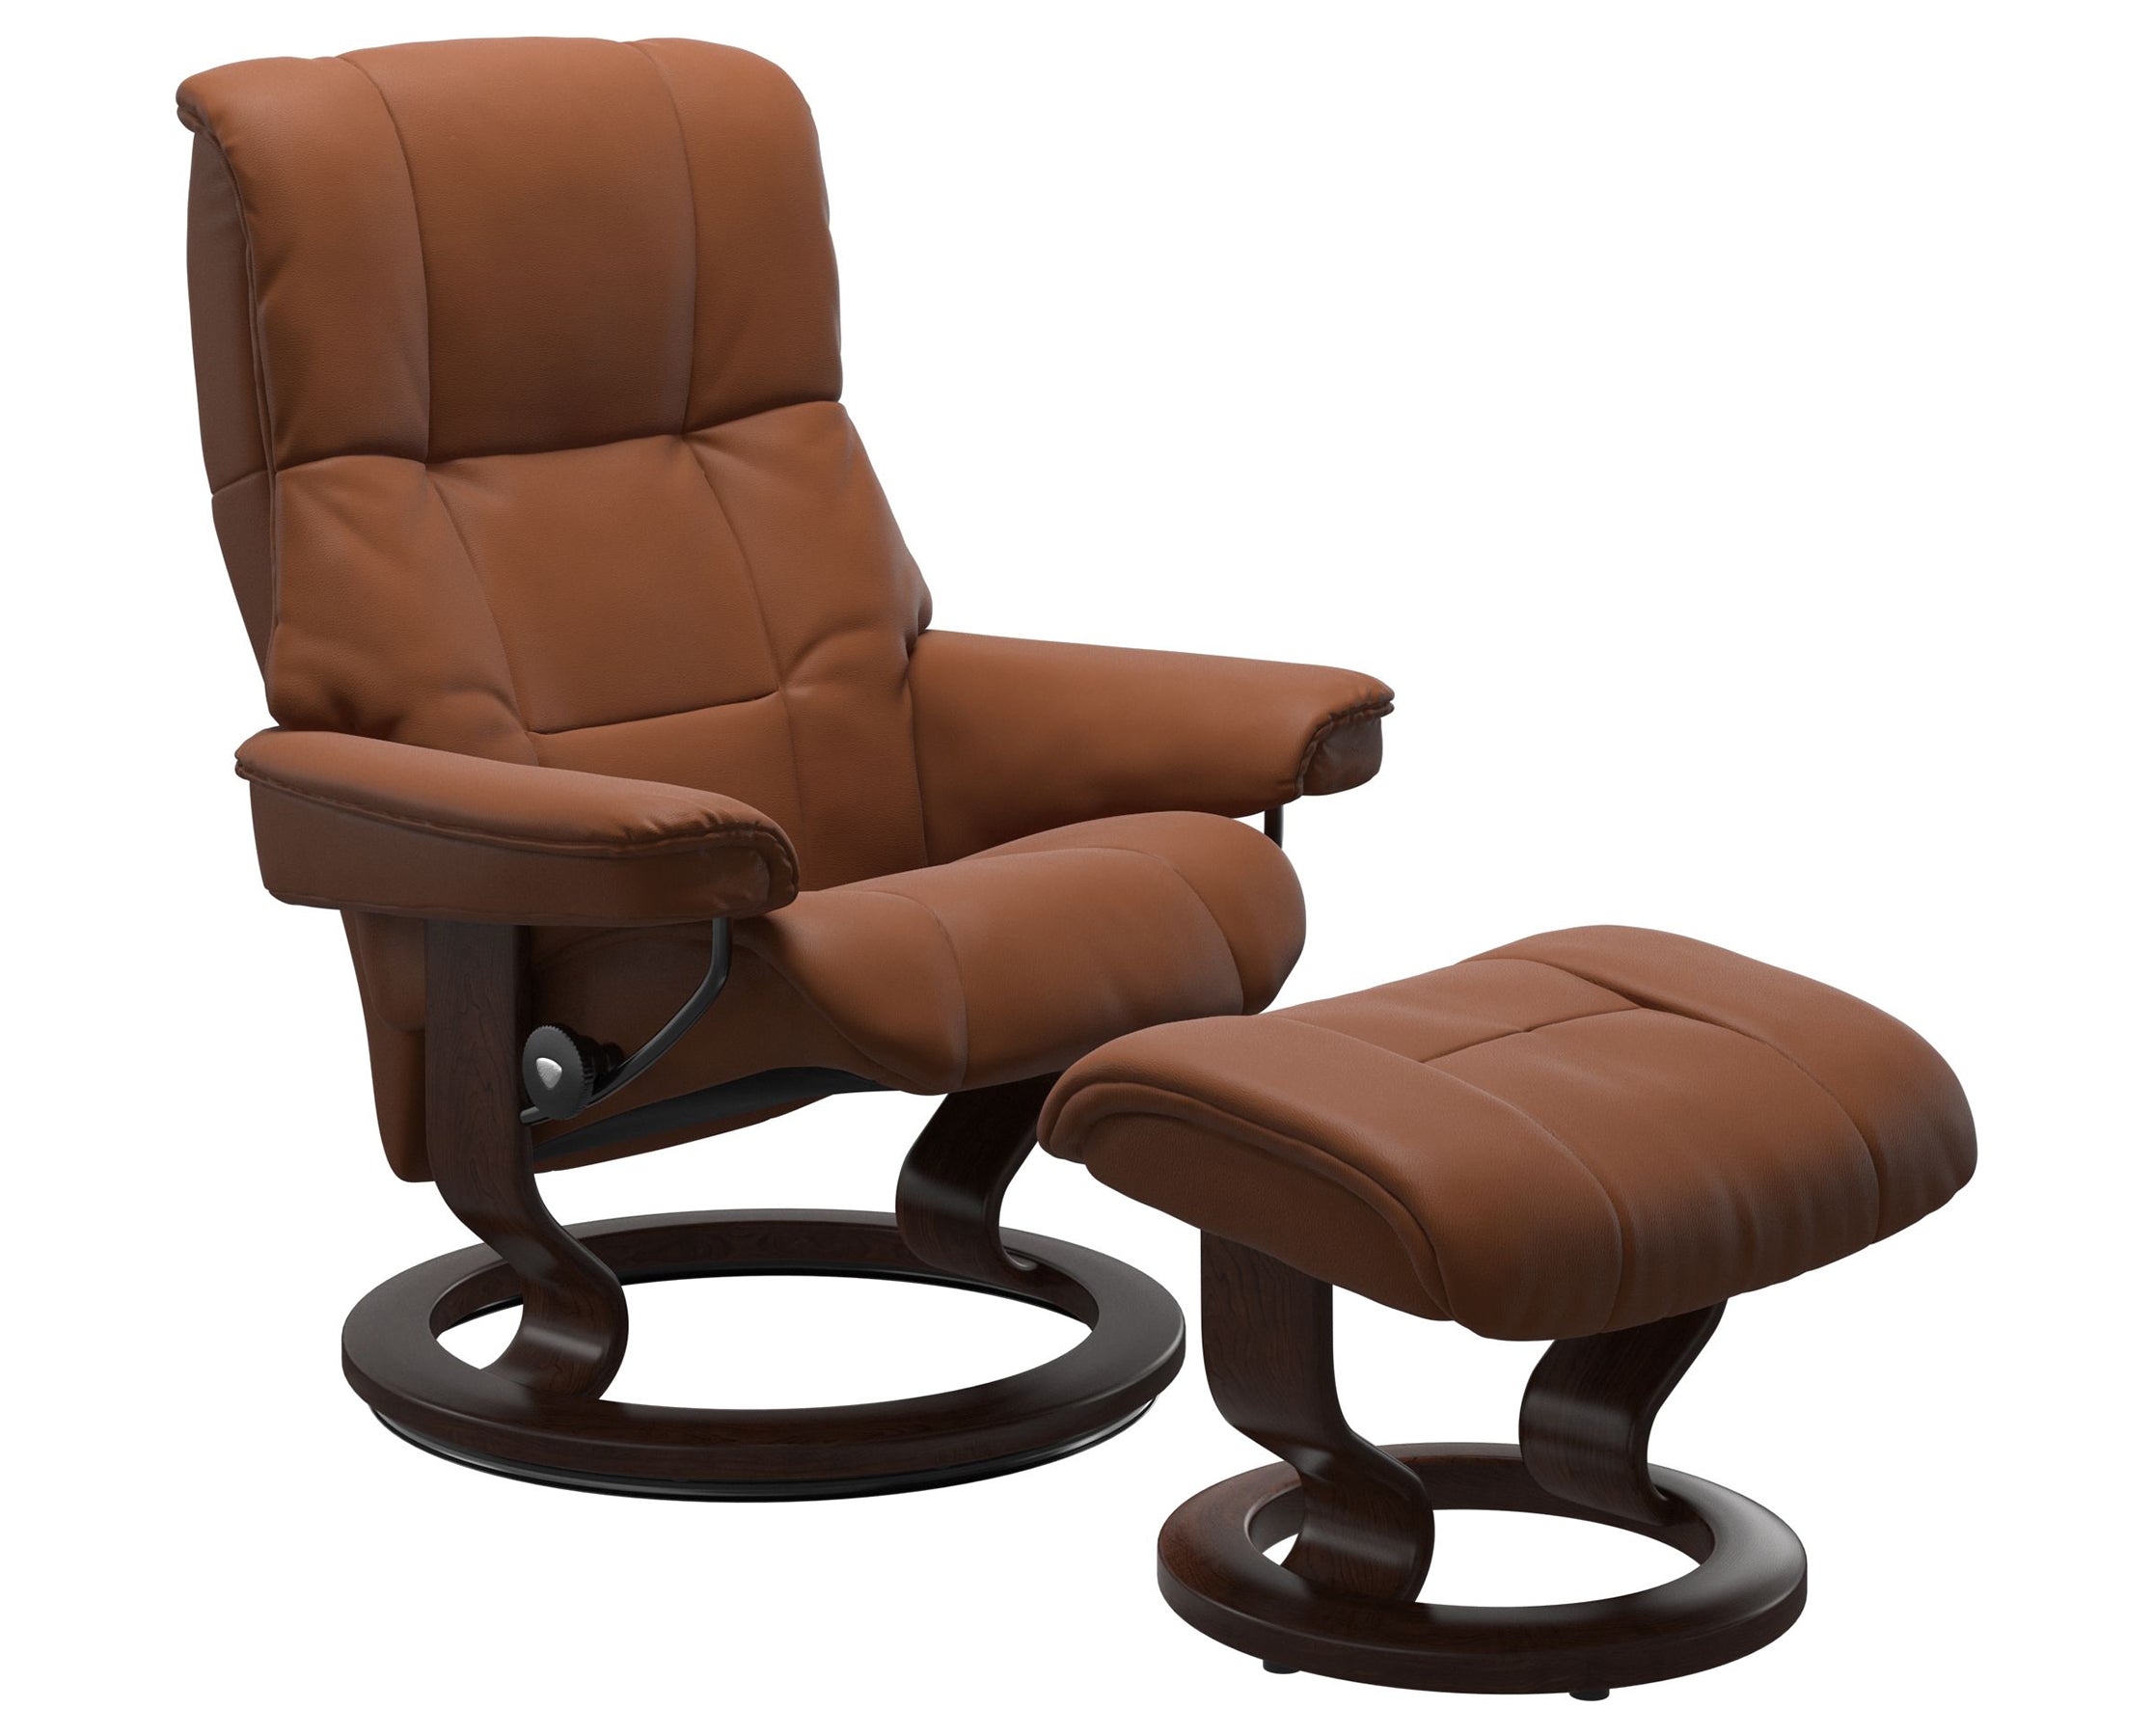 Paloma Leather New Cognac S/M/L and Brown Base | Stressless Mayfair Classic Recliner | Valley Ridge Furniture